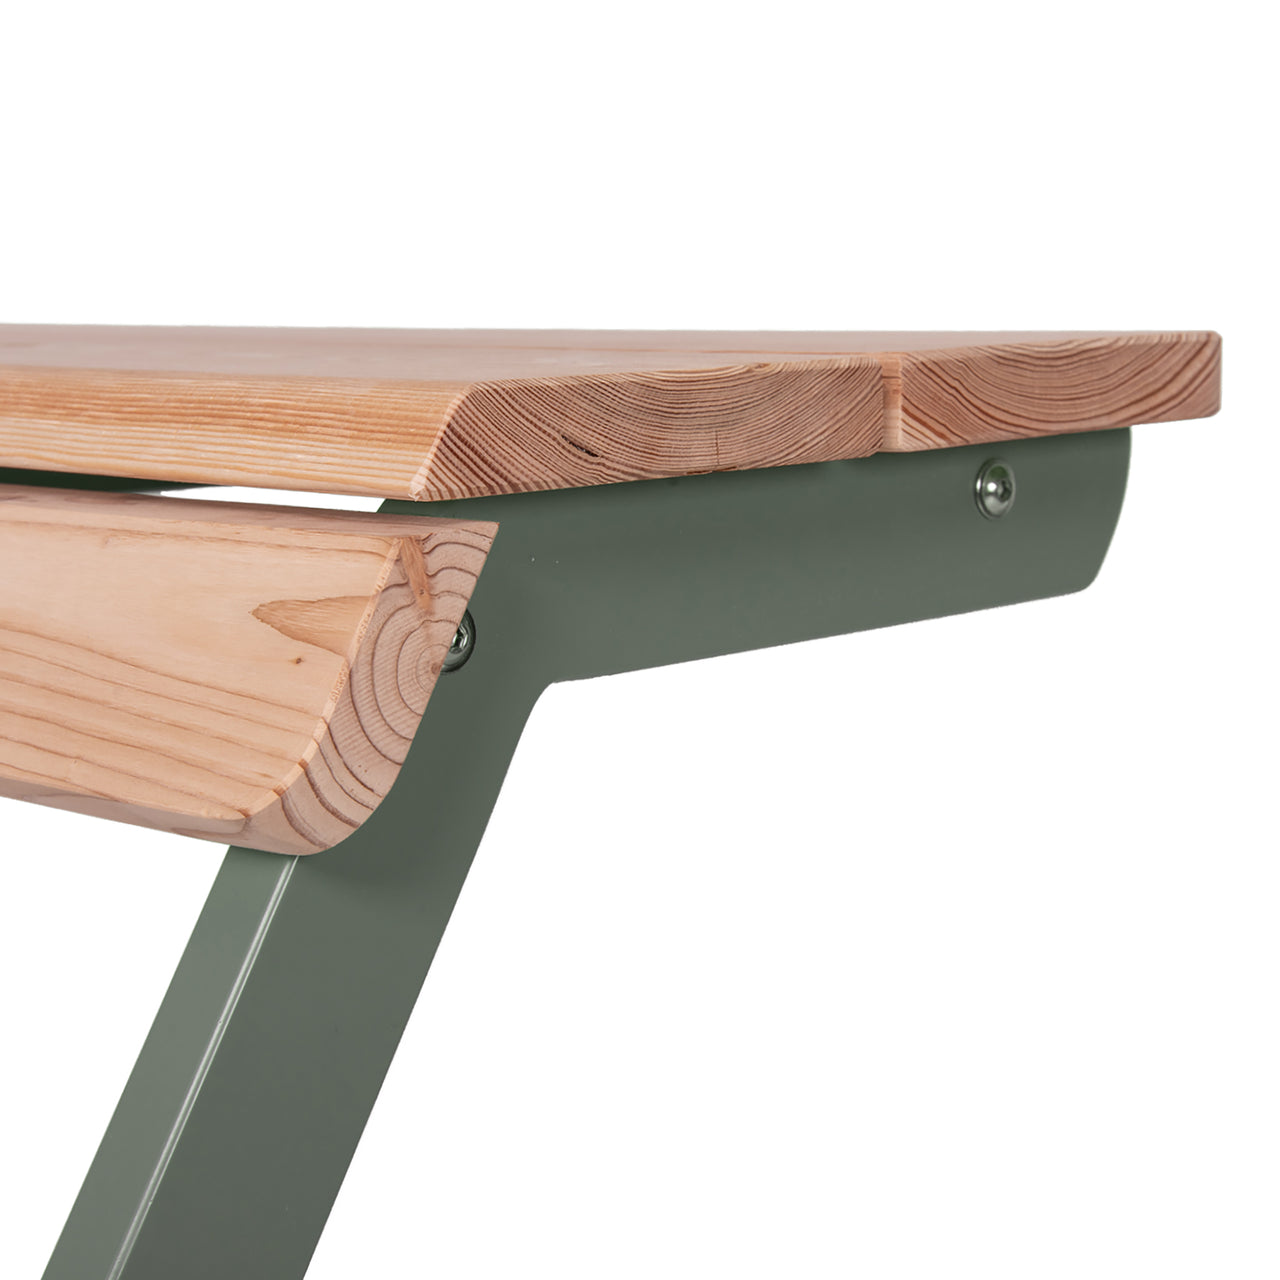 Tablebench 2-Seater